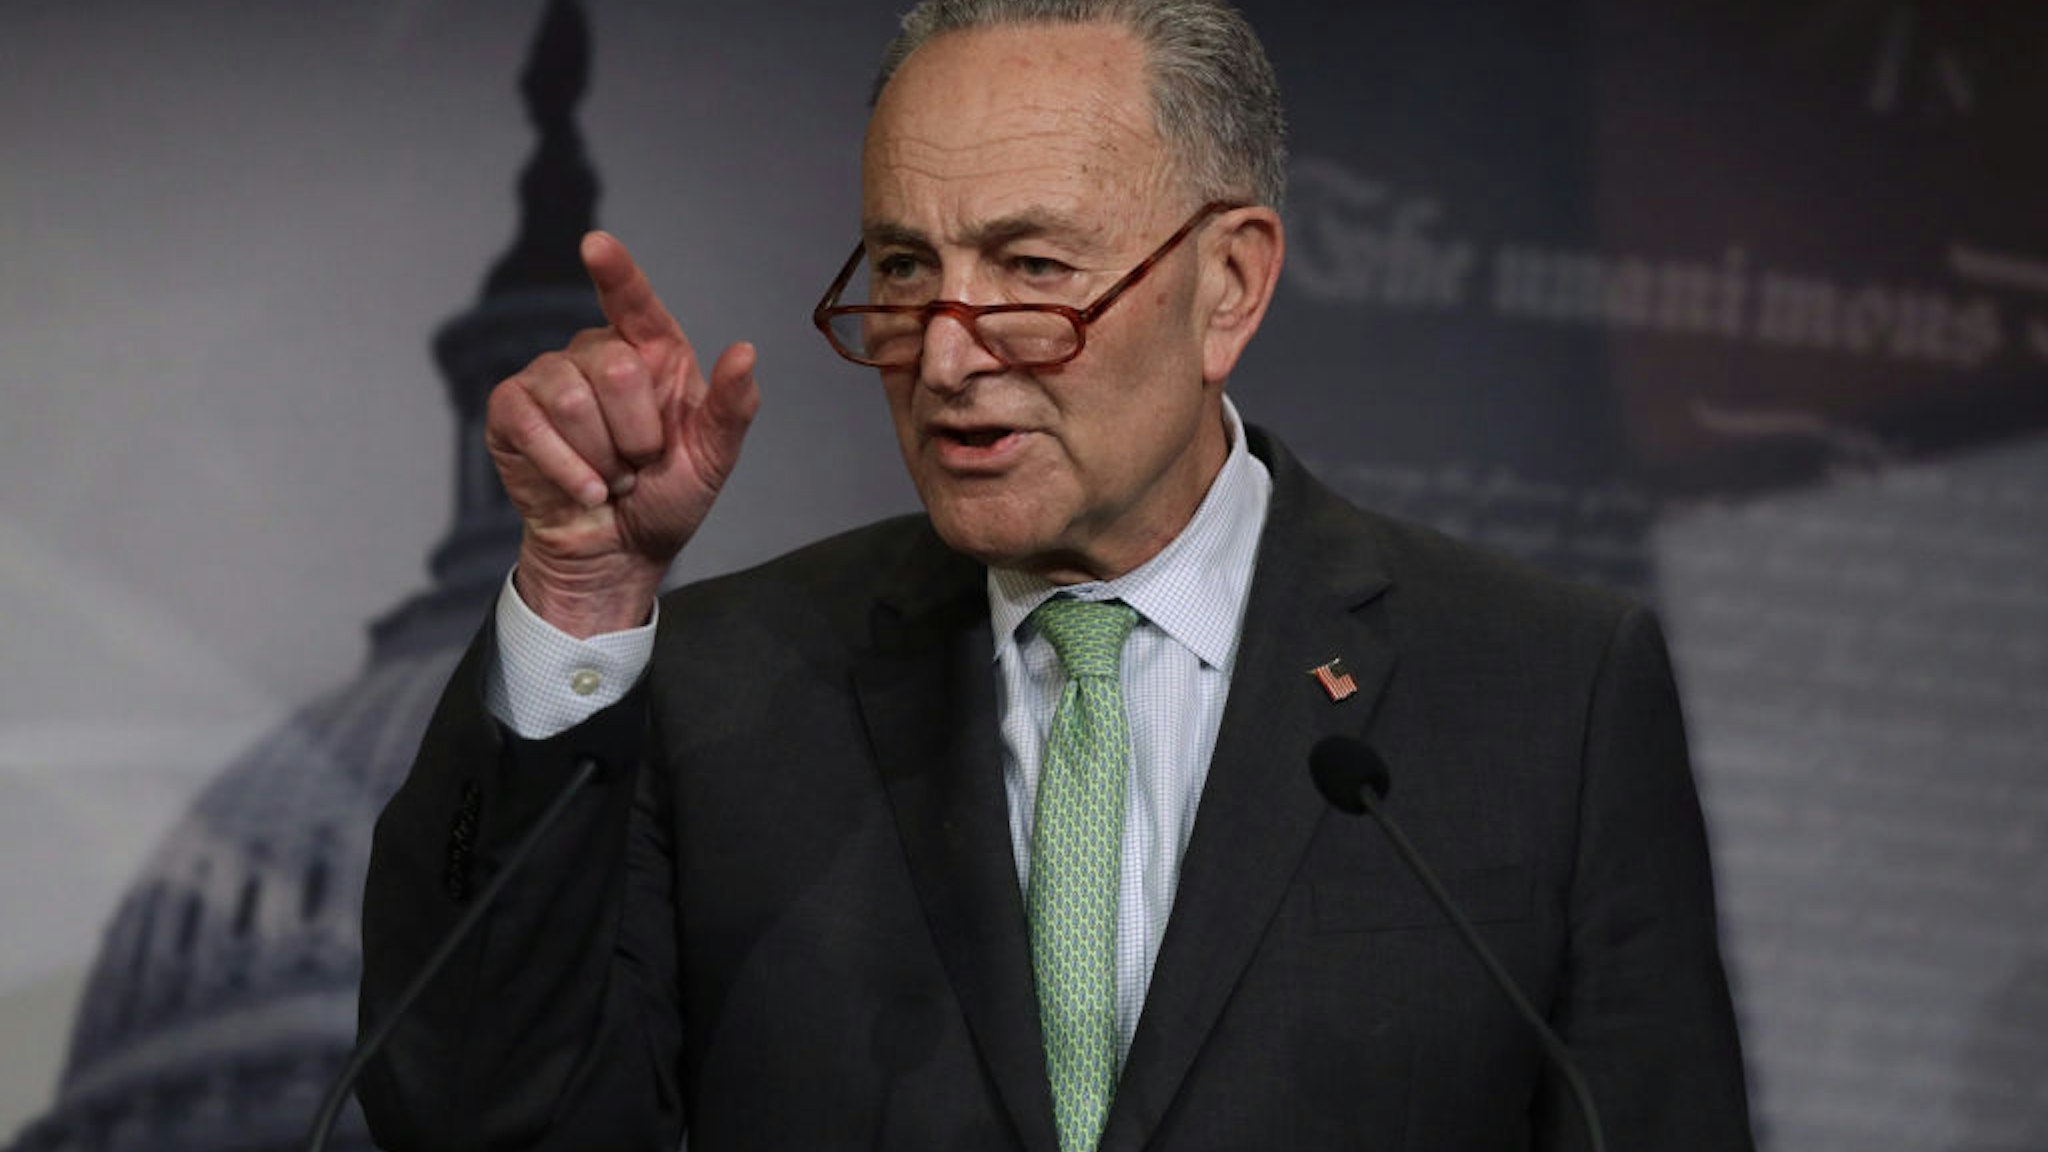 U.S. Senate Minority Leader Sen. Chuck Schumer (D-NY) speaks during a news conference at the U.S. Capitol March 17, 2020 in Washington, DC.